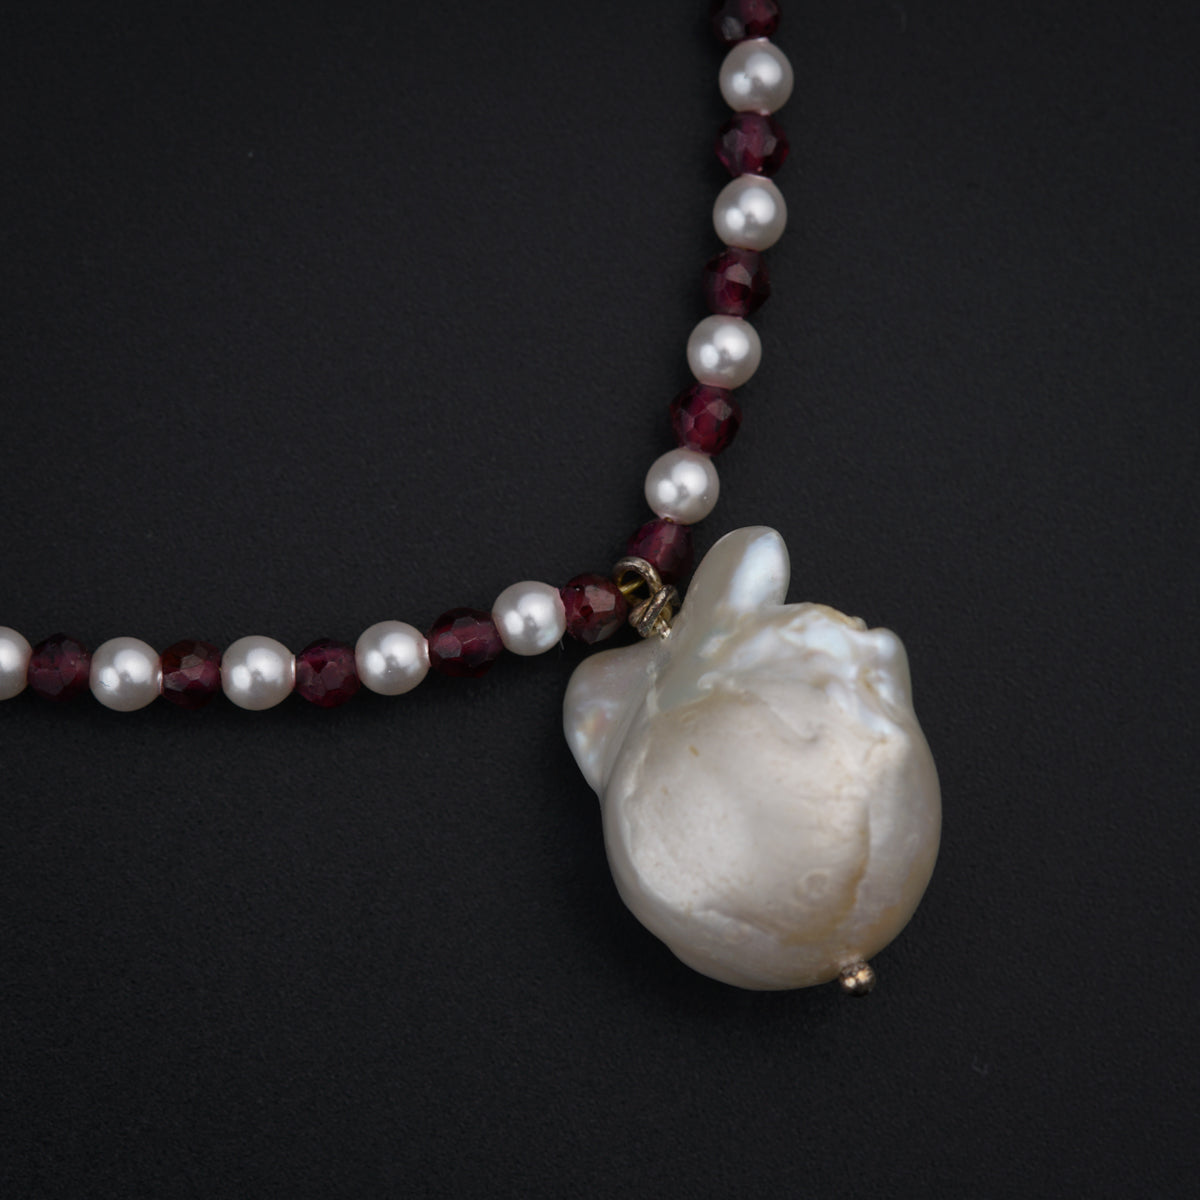 a necklace with a white shell on a beaded necklace